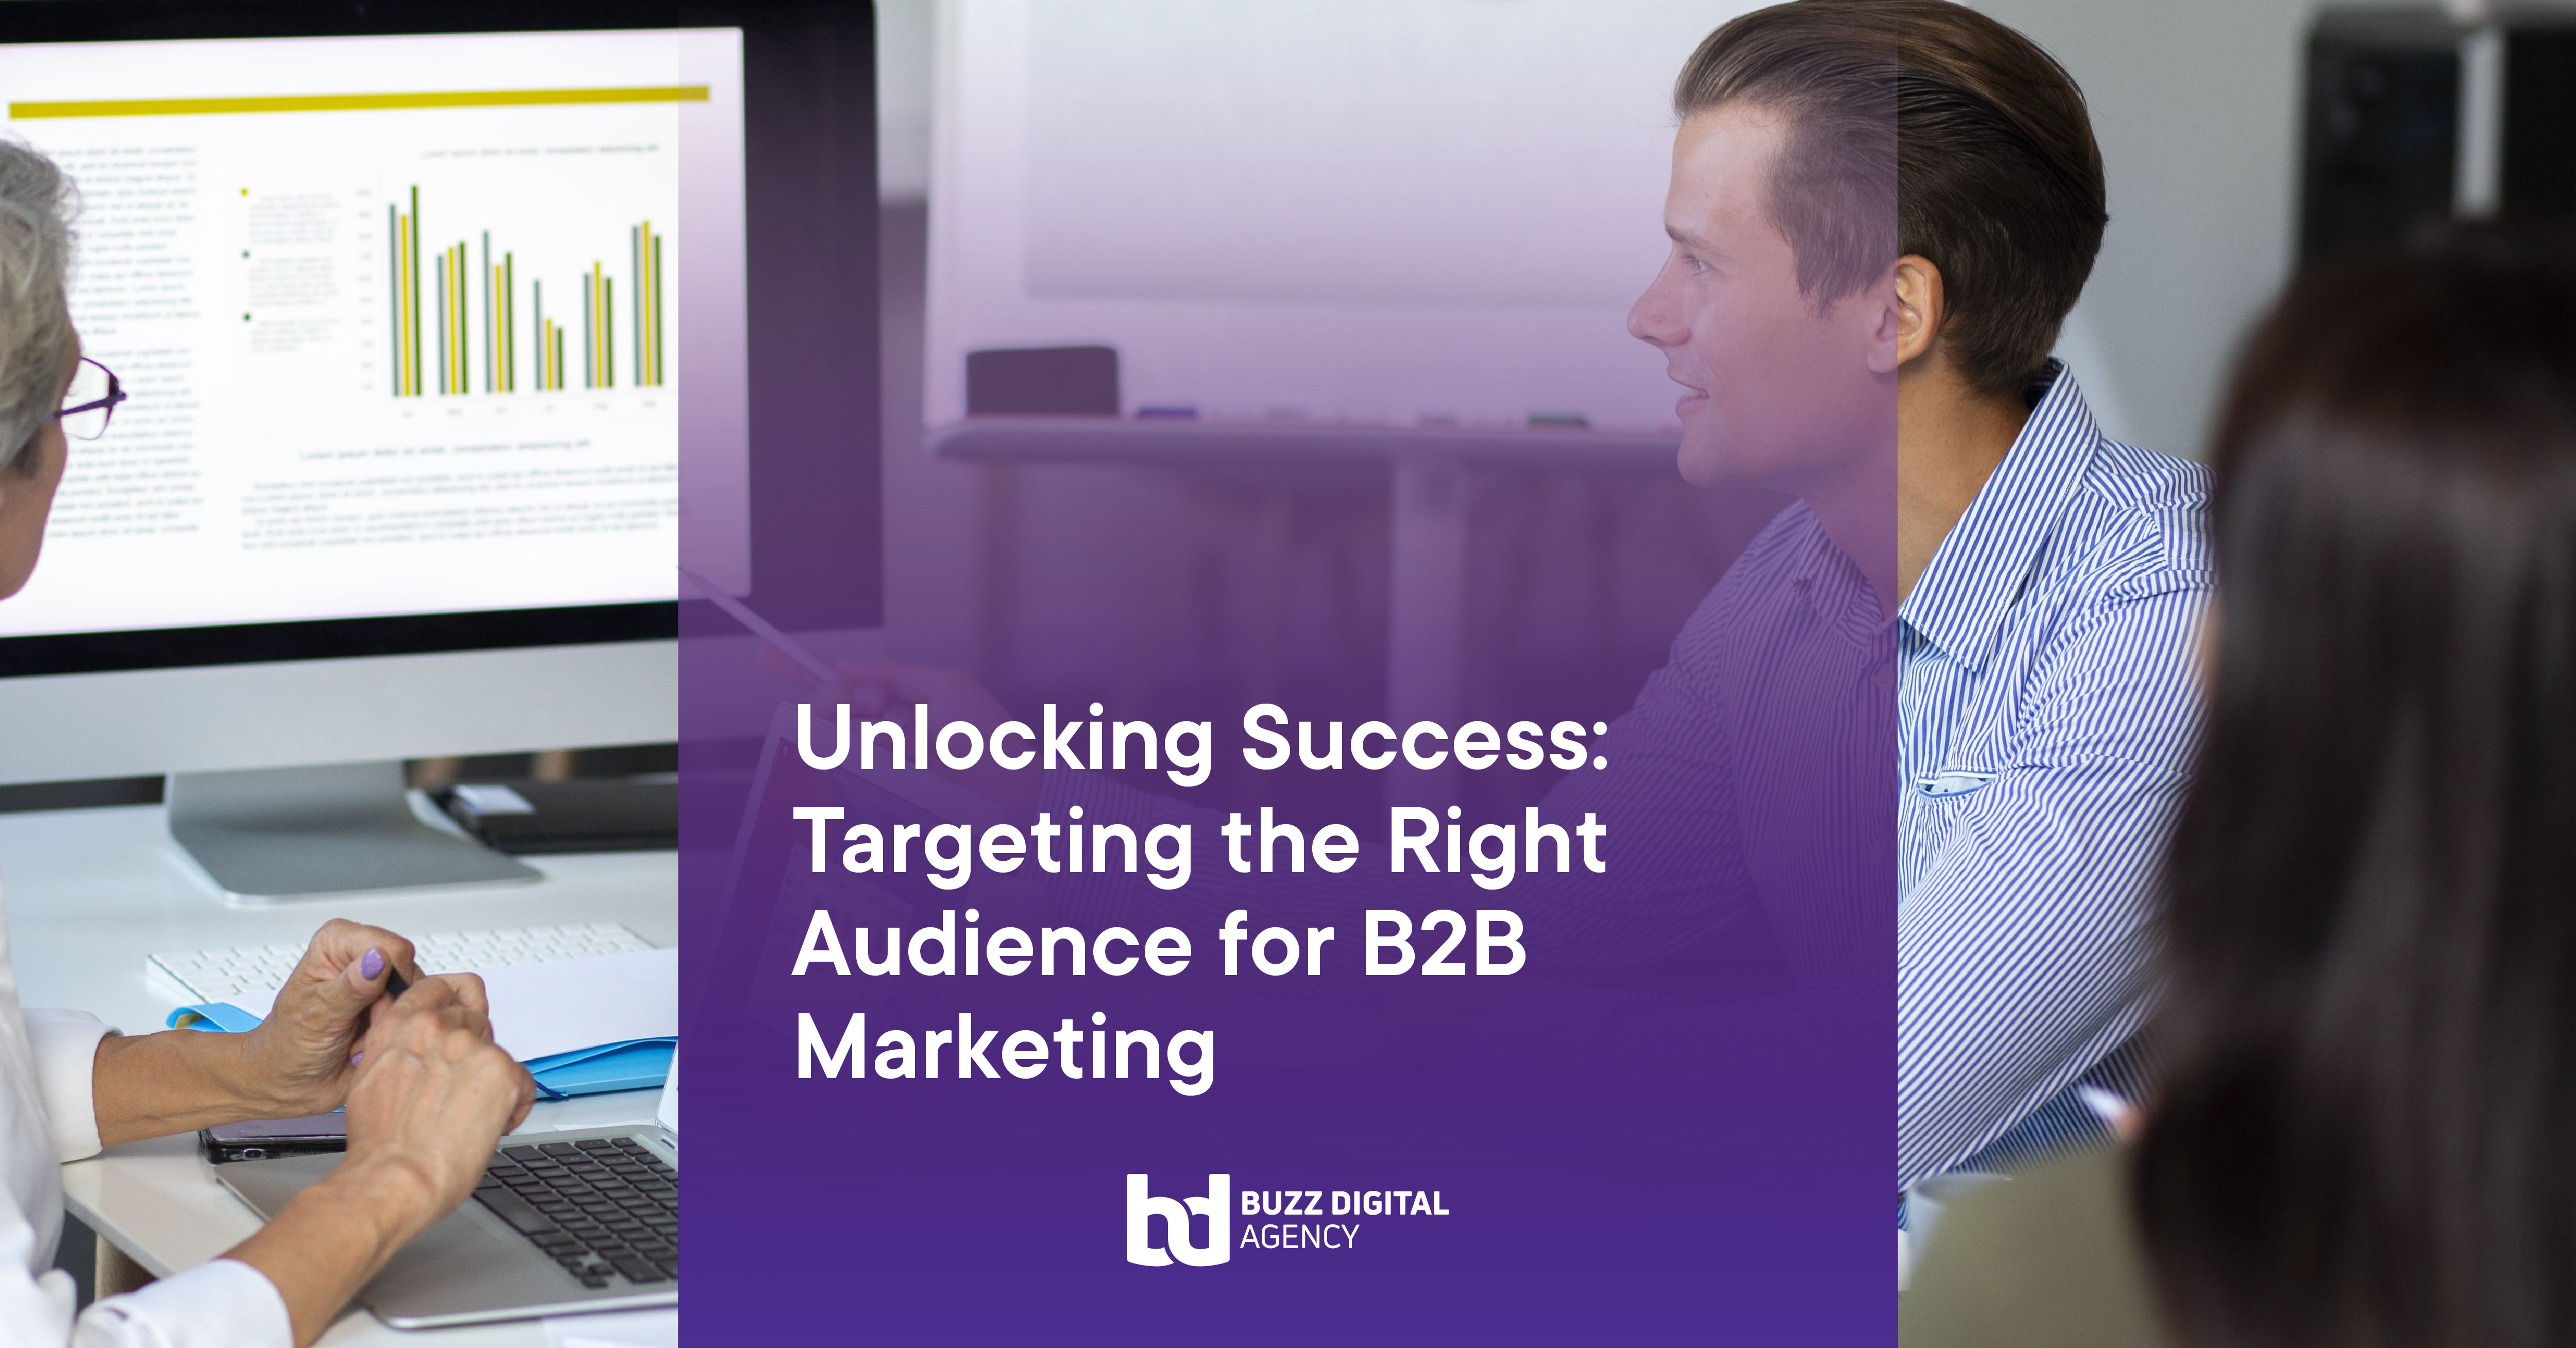 Unlocking Success: Targeting the Right Audience for B2B Marketing